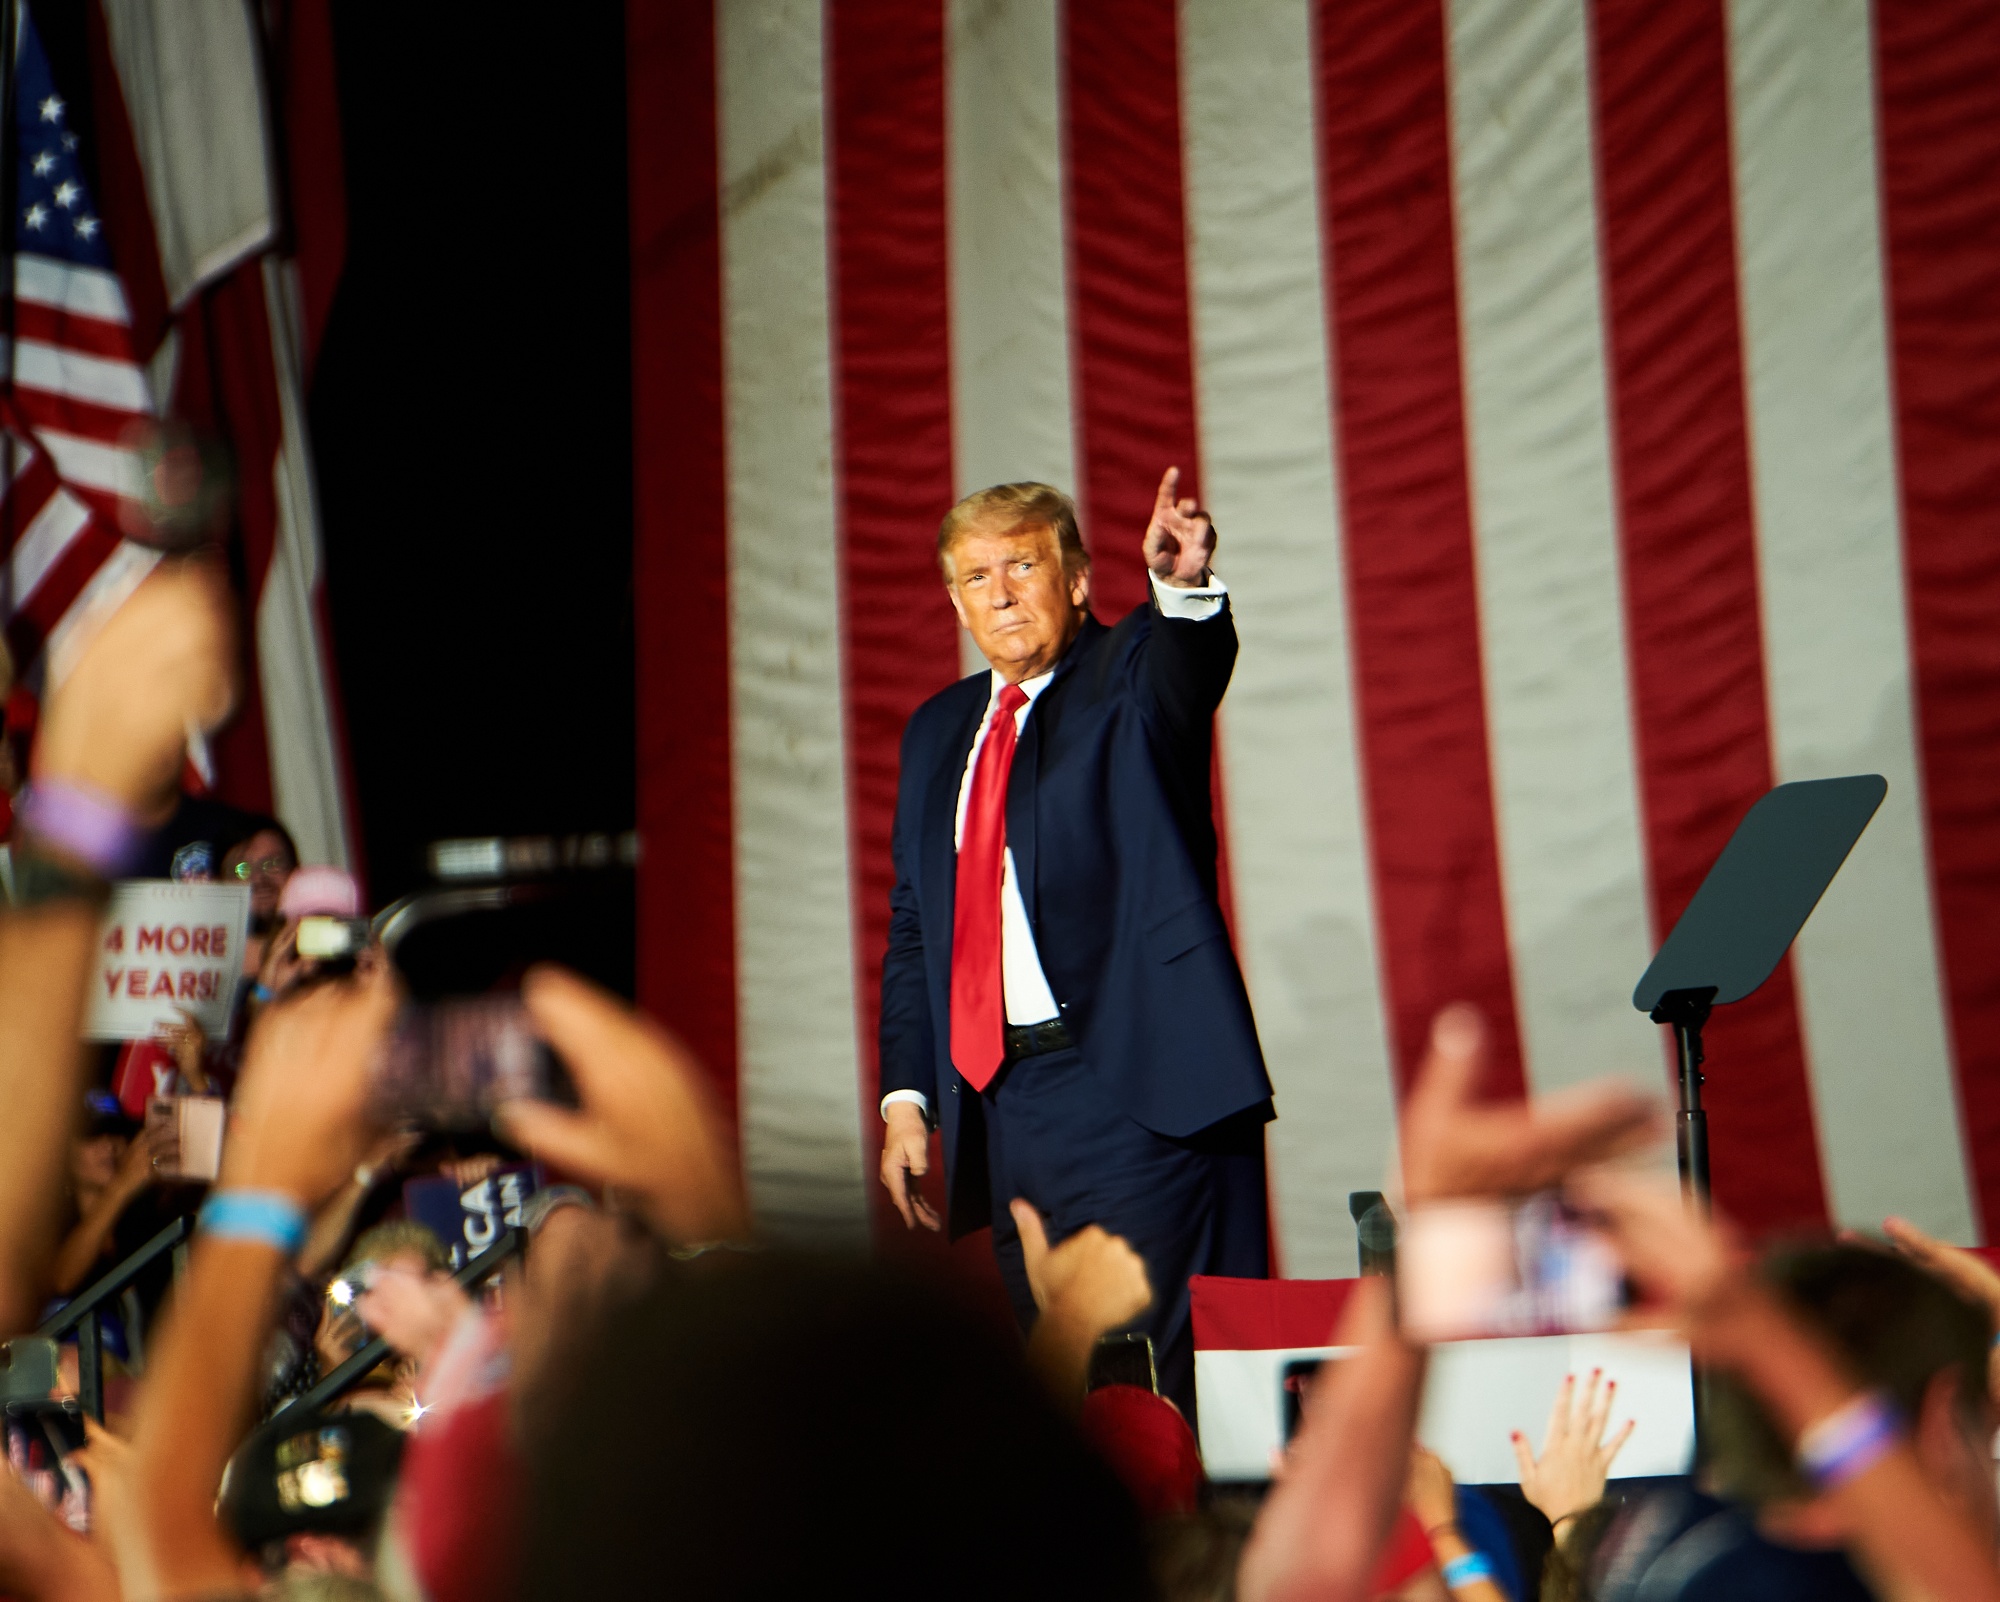 Trump during a rally in Sanford, Florida on Oct. 12.&nbsp;Trump and Biden are effectively tied in the RealClearPolitics average of polls for the state.